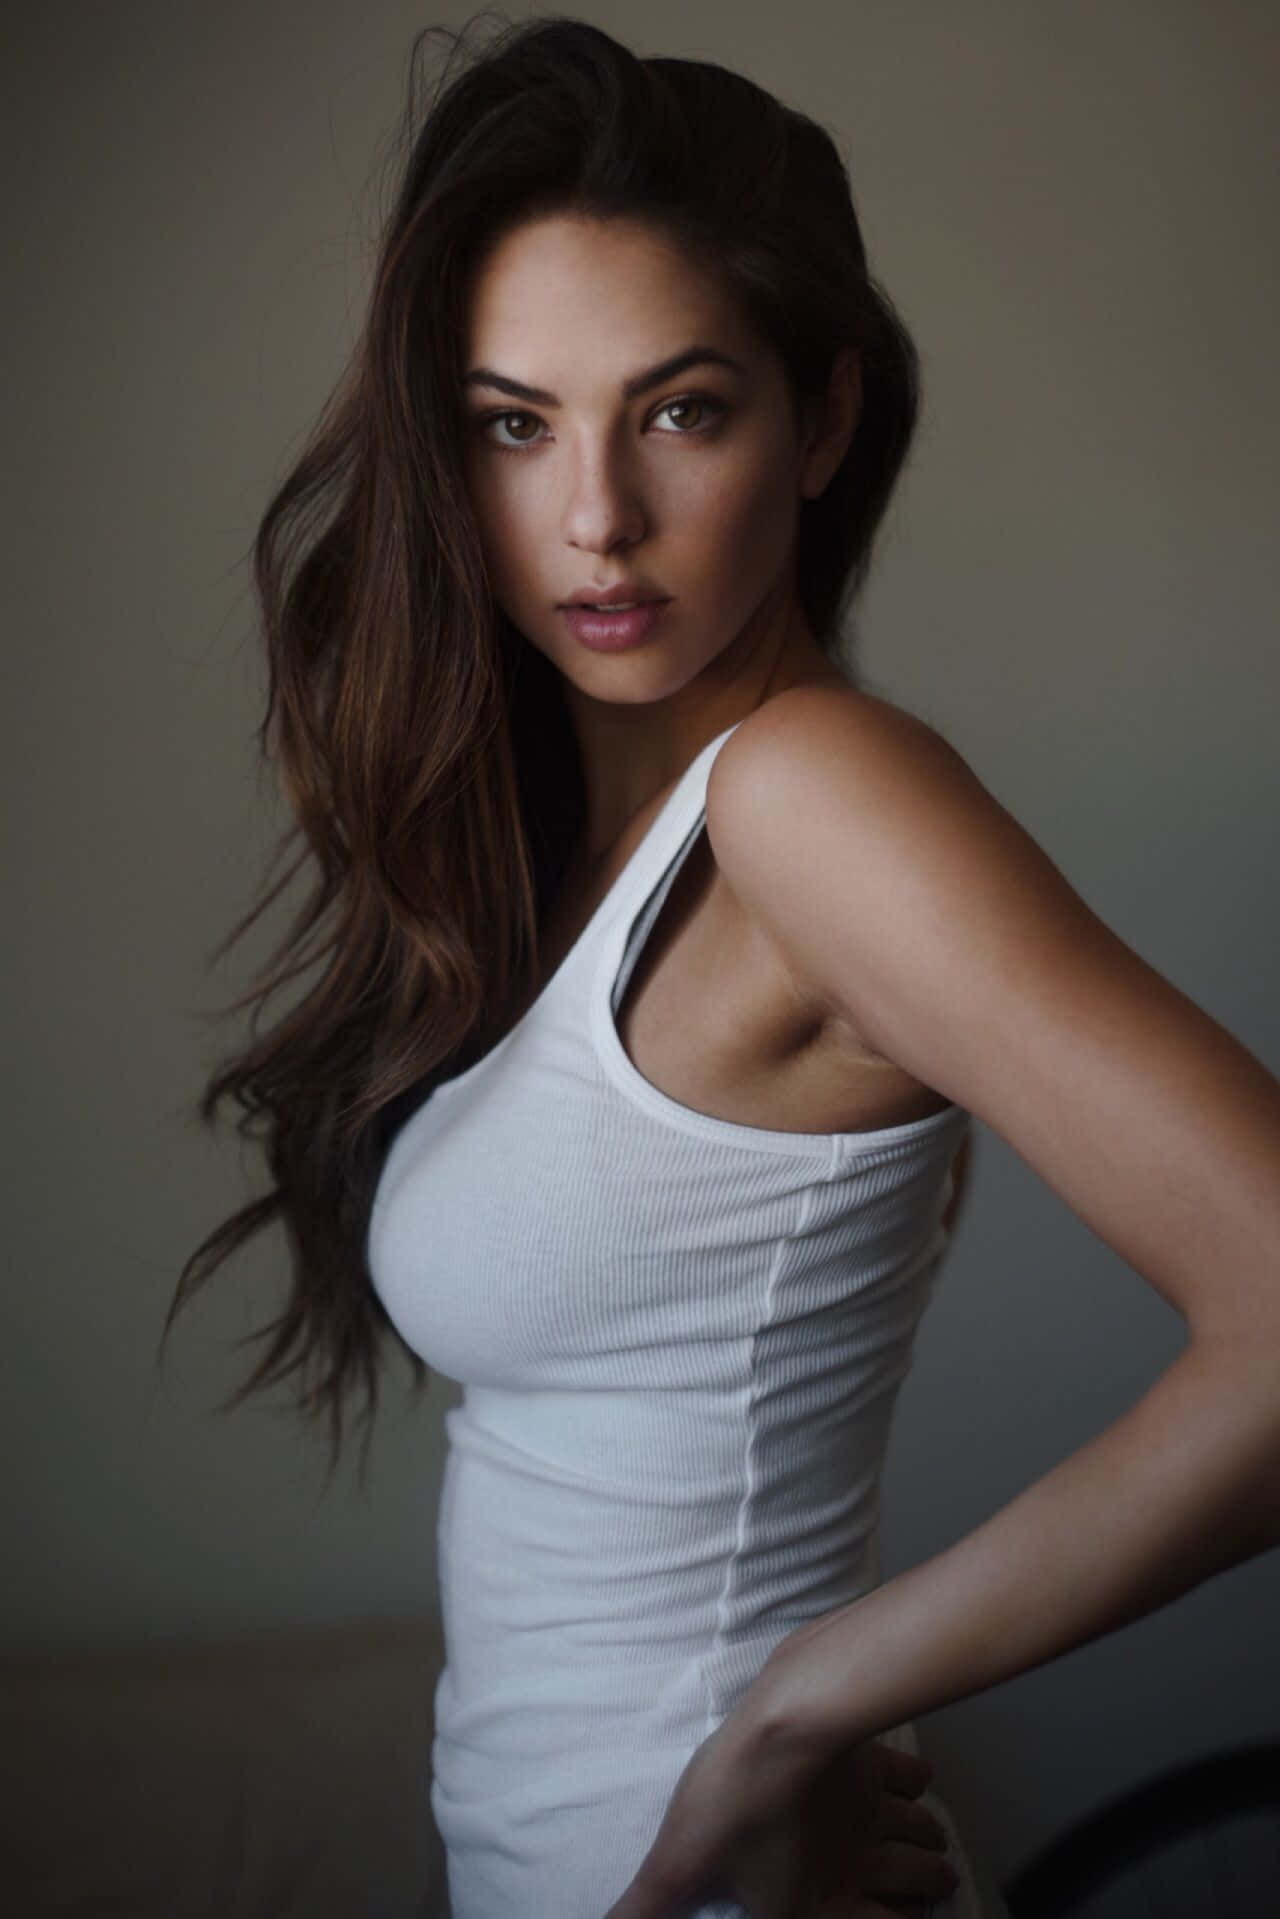 A Beautiful Woman In A White Tank Top